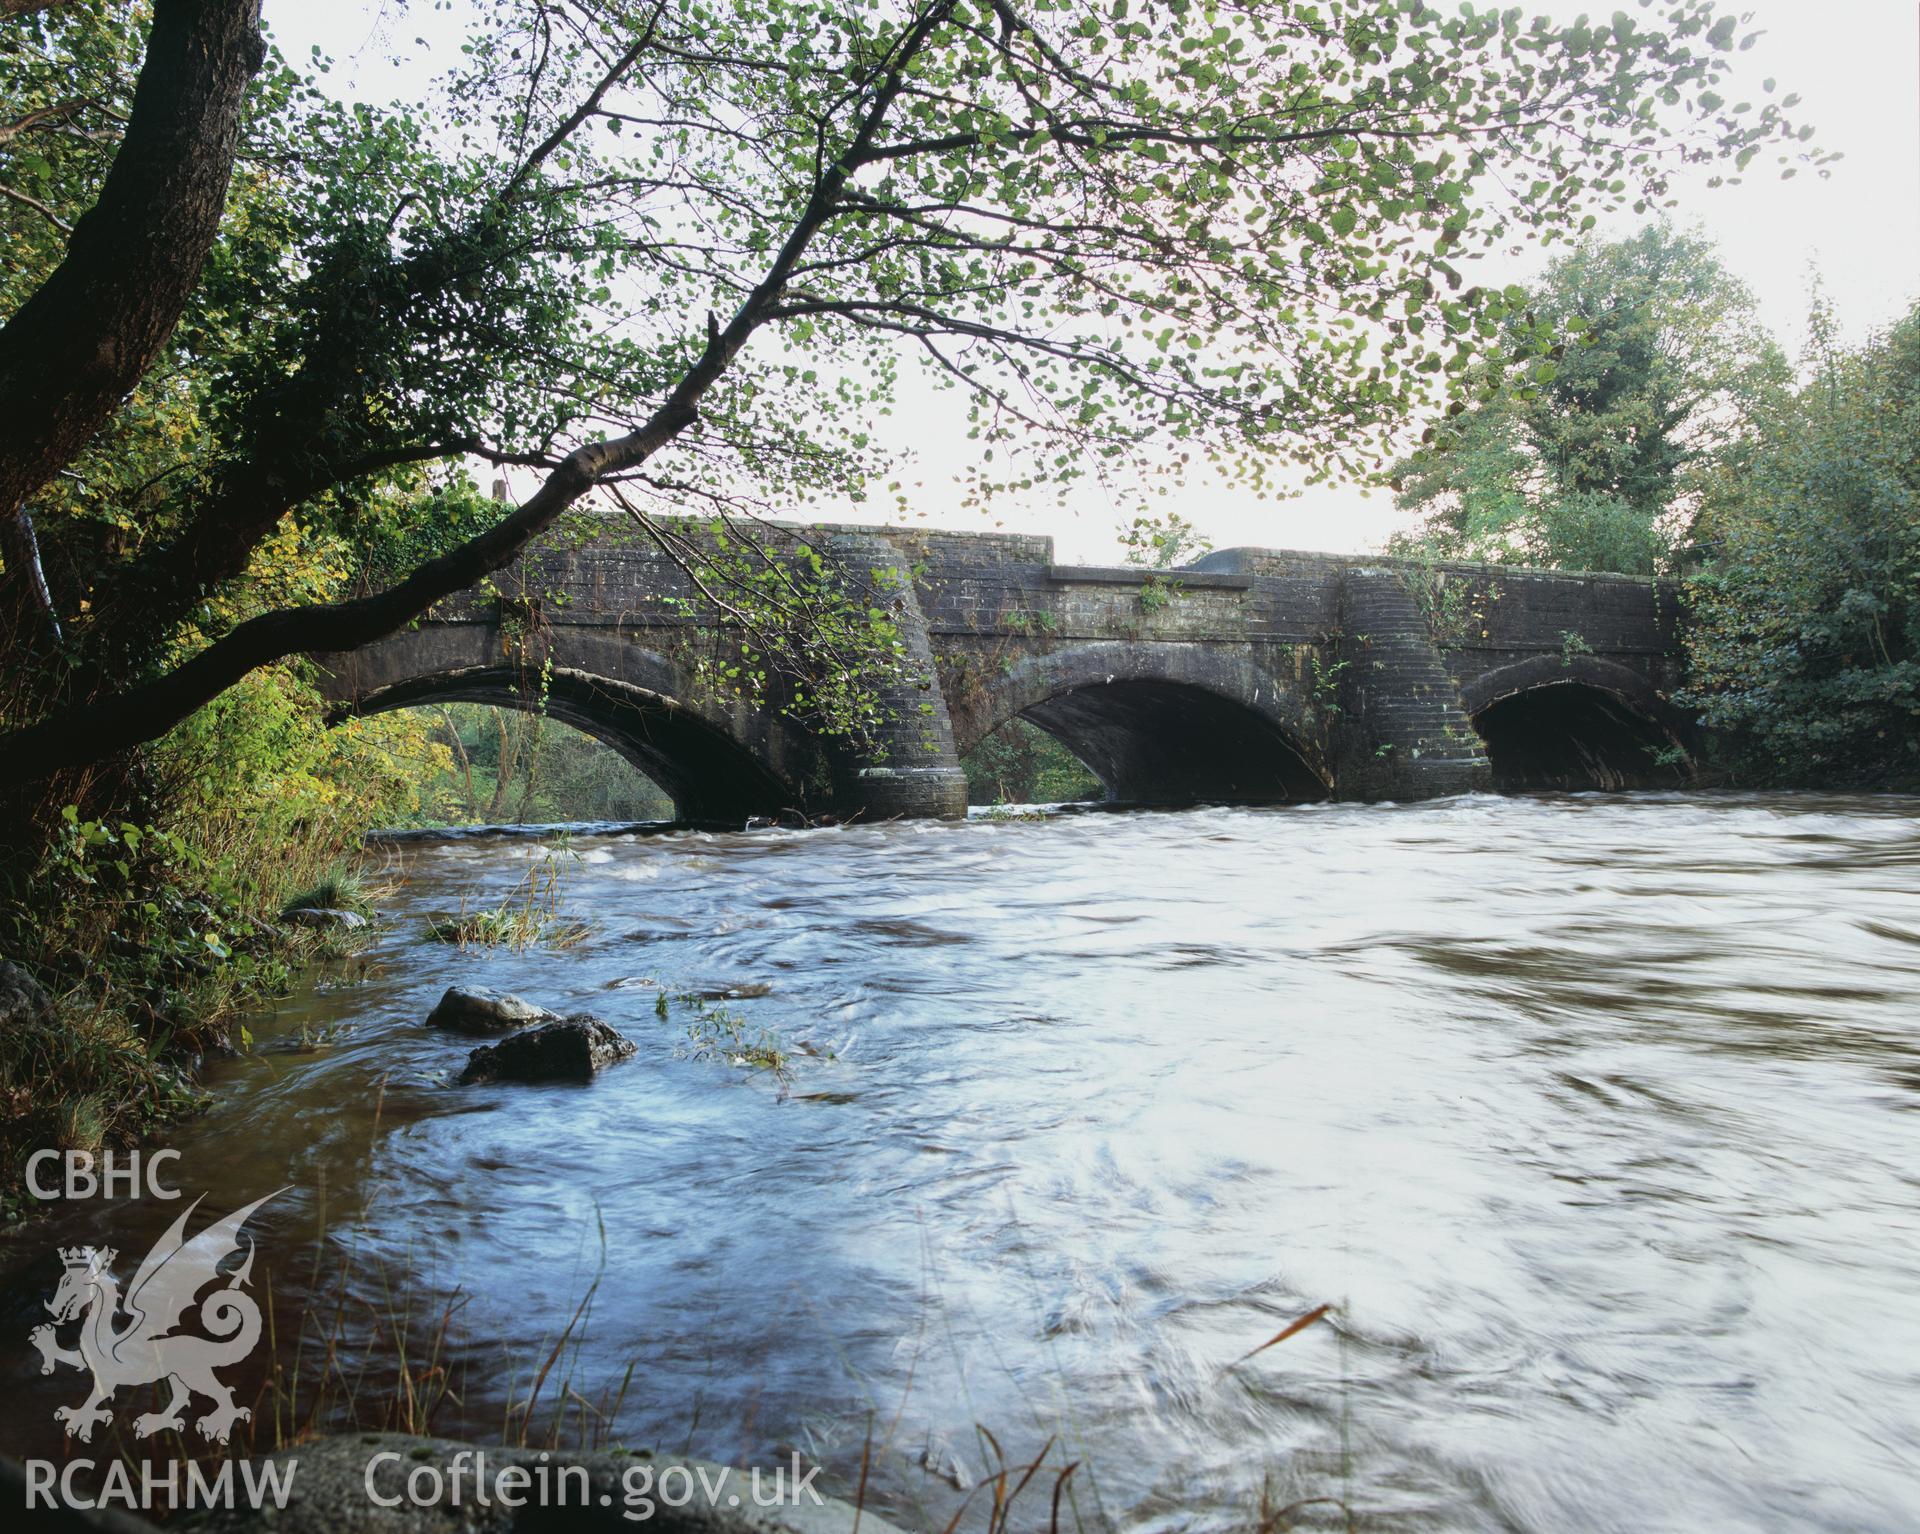 RCAHMW colour transparency showing view of the Afon Twrch Aqueduct, Swansea Canal, taken by I.N. Wright, October 2005